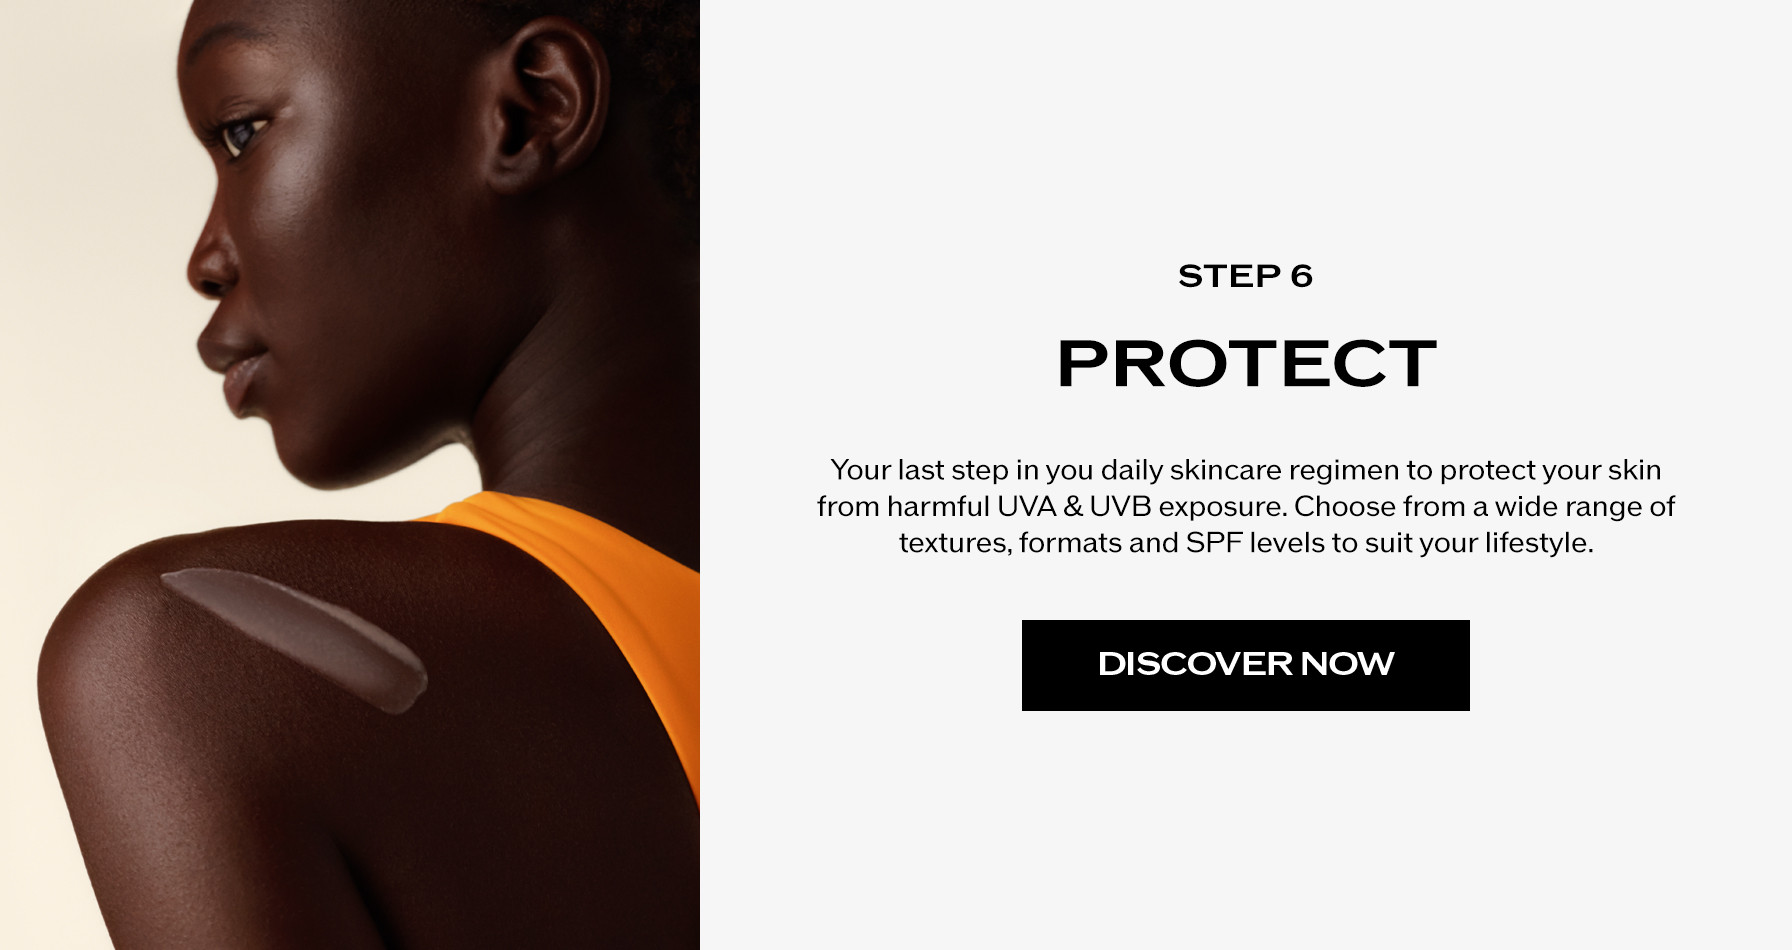 Step 6: Protect. Your last step in you daily skincare regimen to protect your skin from harmful UVA & UVB exposure. Choose from a wide range of textures, formats and SPF levels to suit your lifestyle.